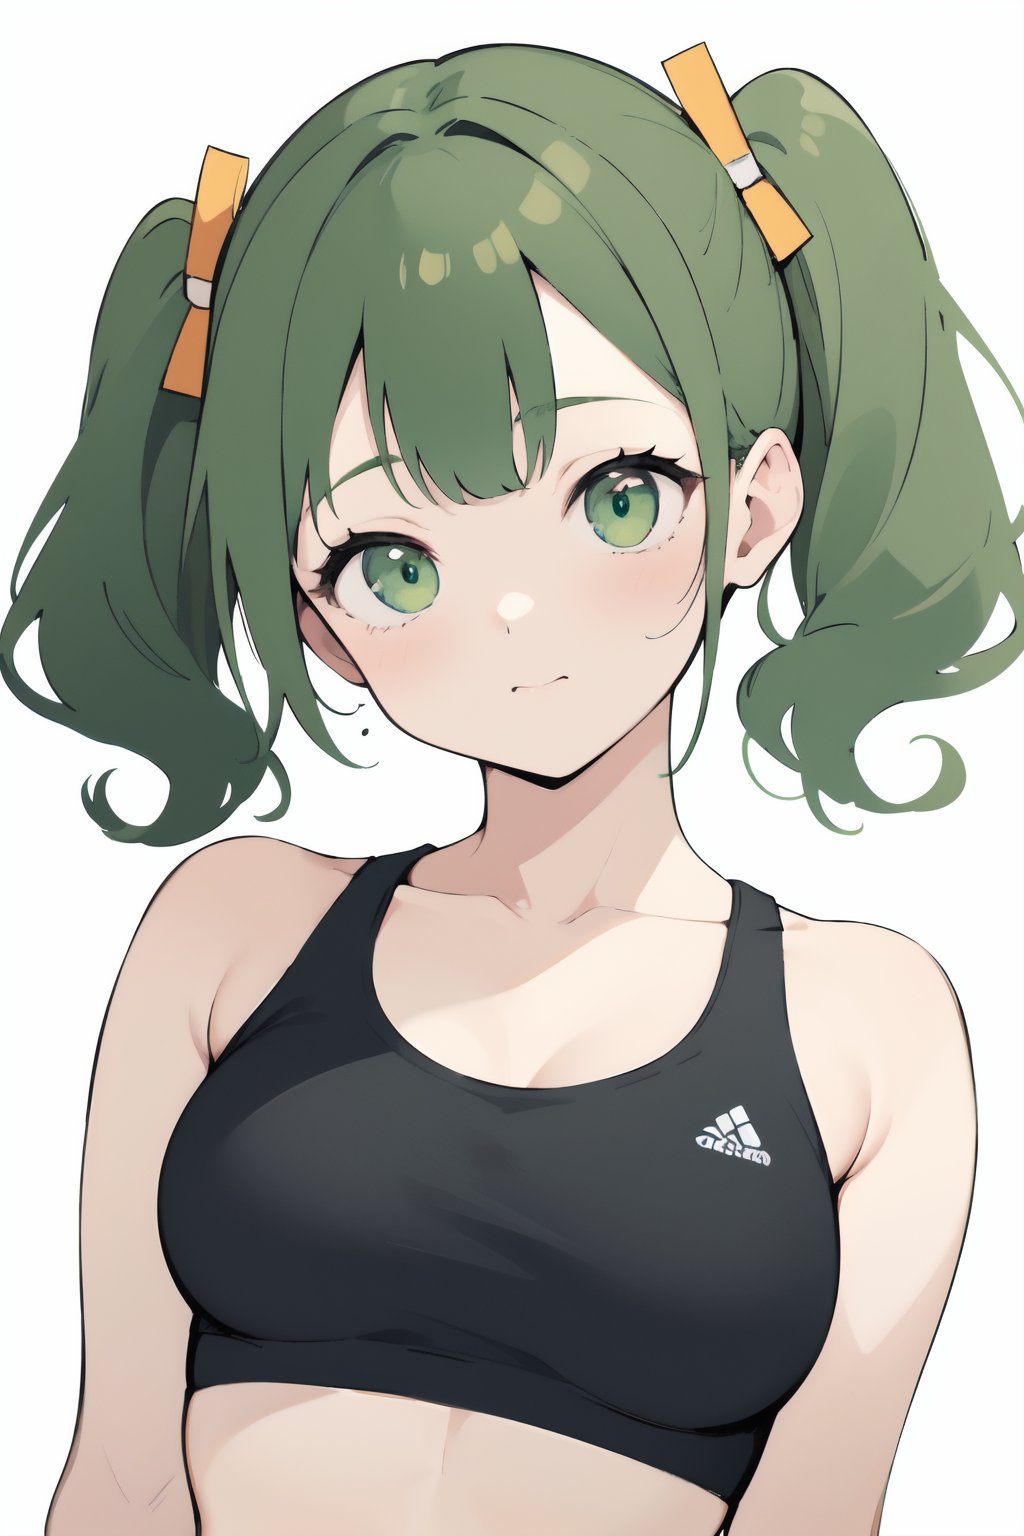 (finely best quality illustration:1.2), (kawaii girl:1.1), (1girl, solo:1.0), (green curly hair, short twintails:1.0), (sports bra:1.0), (upper body:1.0), (white background:1.0), (ultra-detailed, highres:1.0), (sfw:1.0),